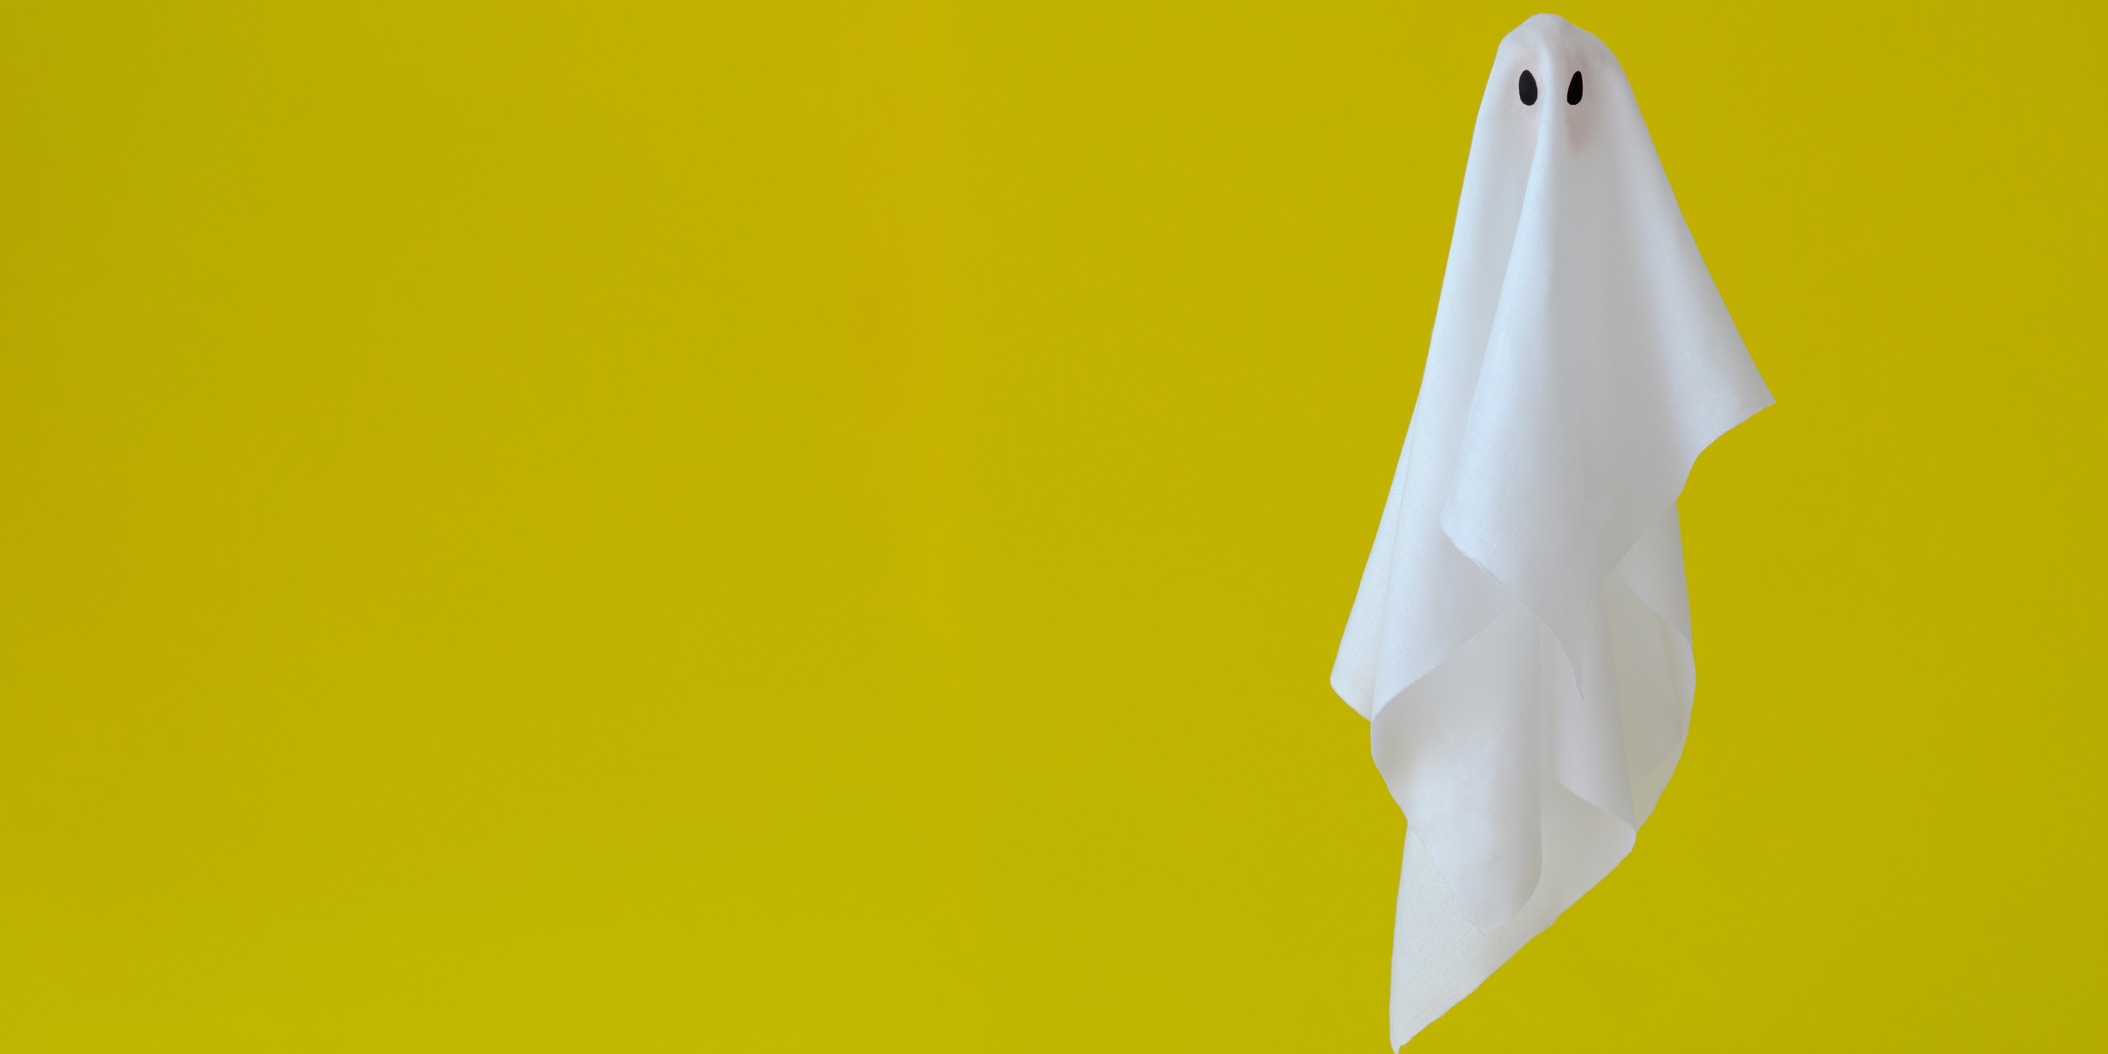 Scary Good Advice to Avoid Being Ghosted by Prospects